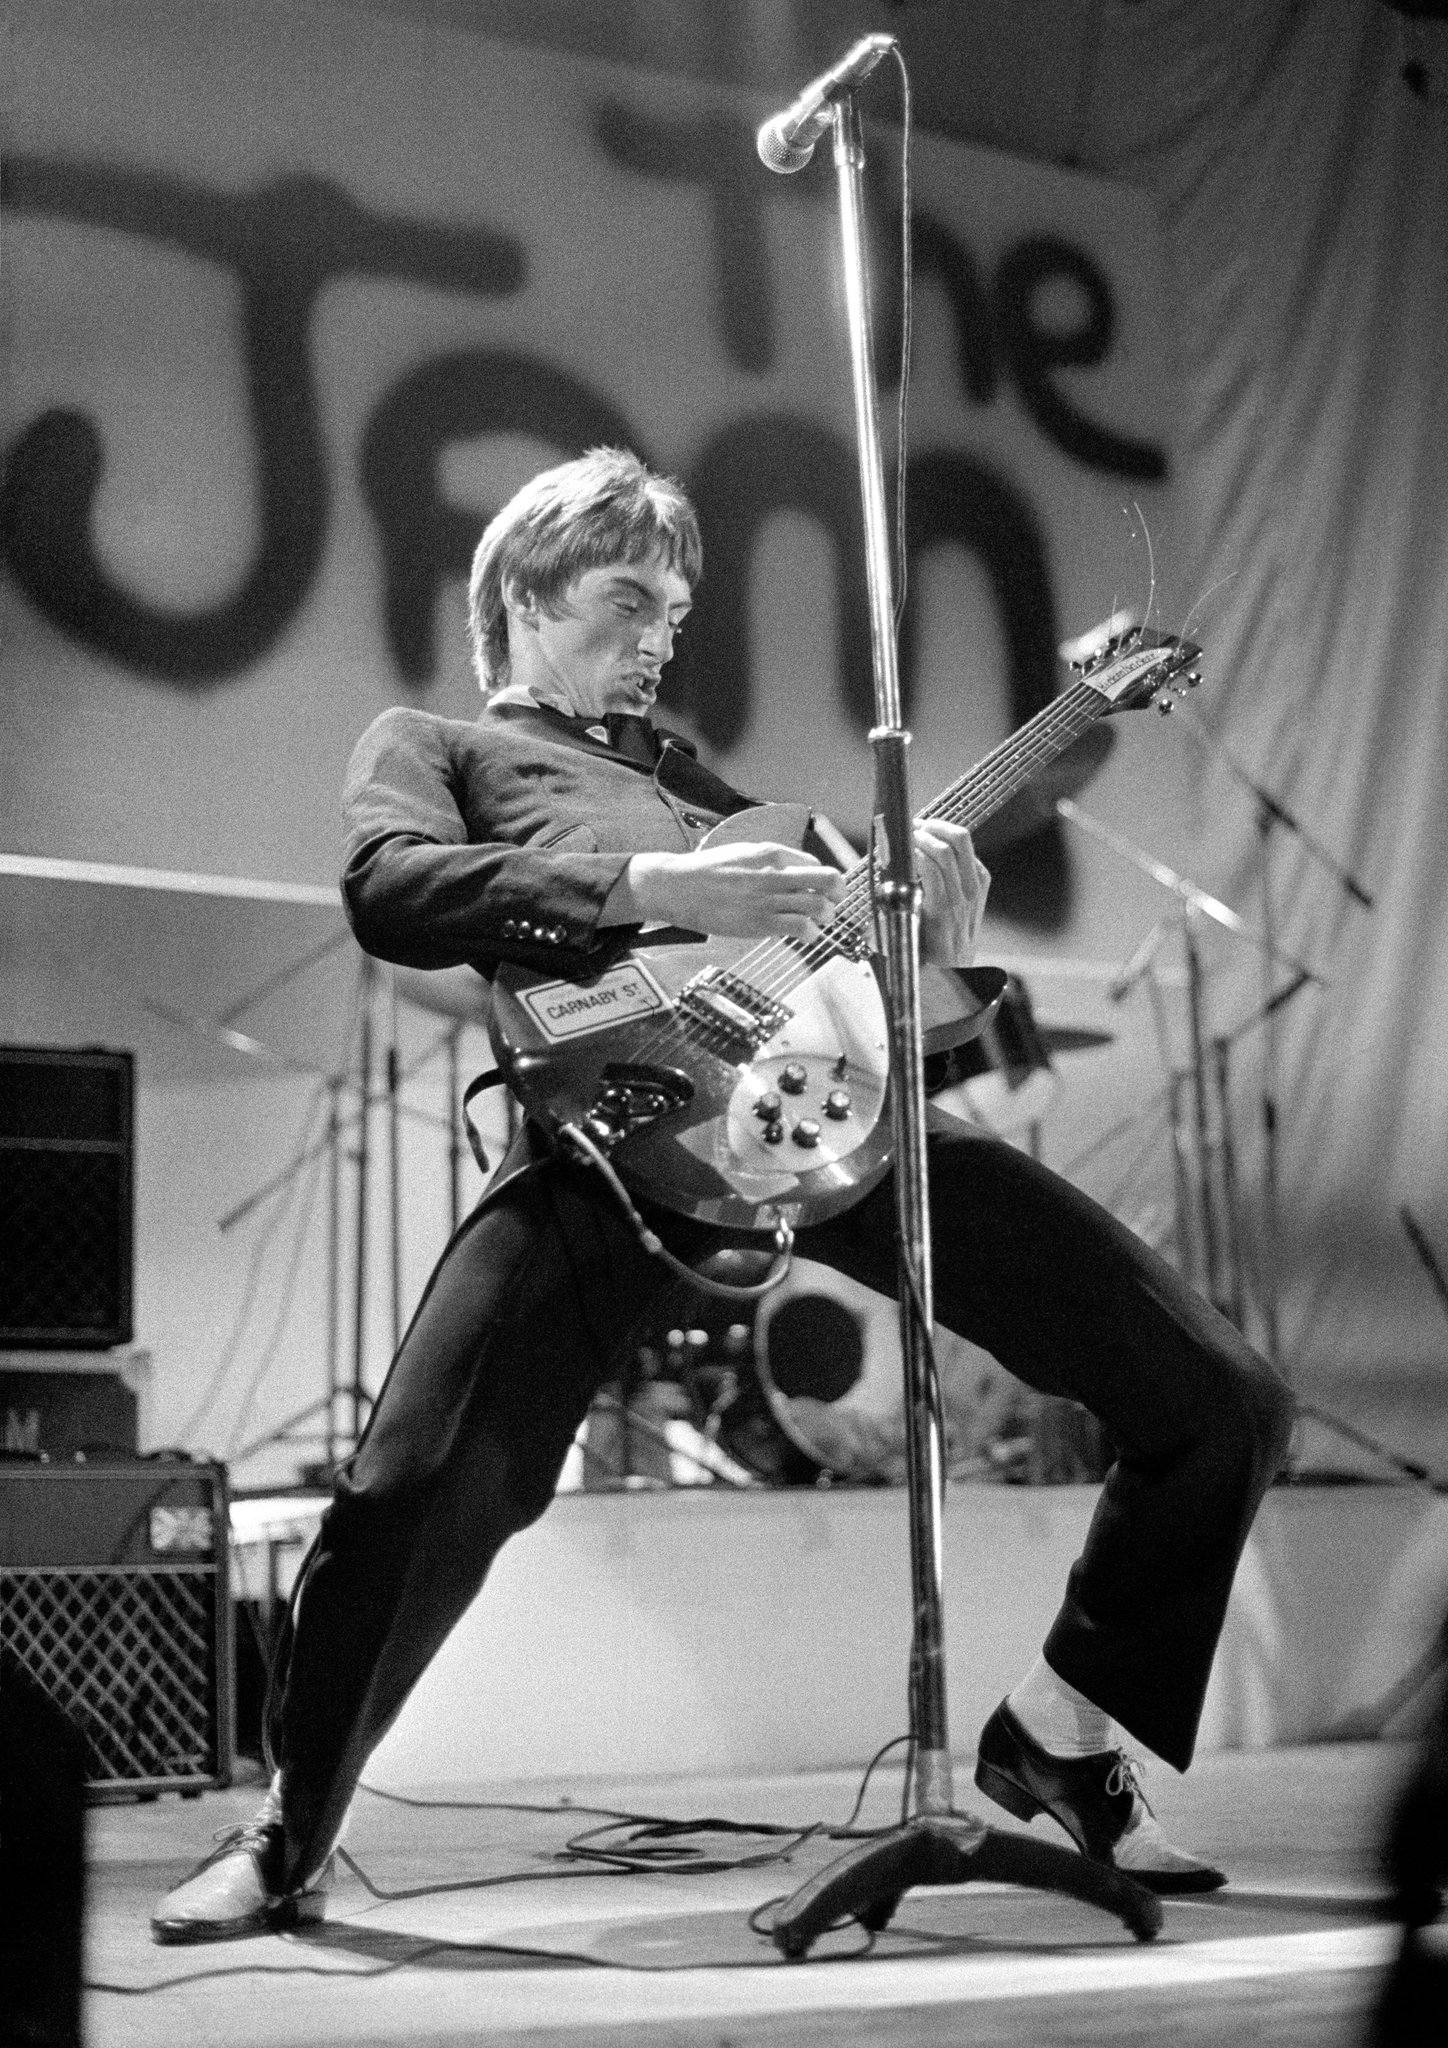 Happy 60th Birthday to the Modfather himself, Mr Paul Weller  